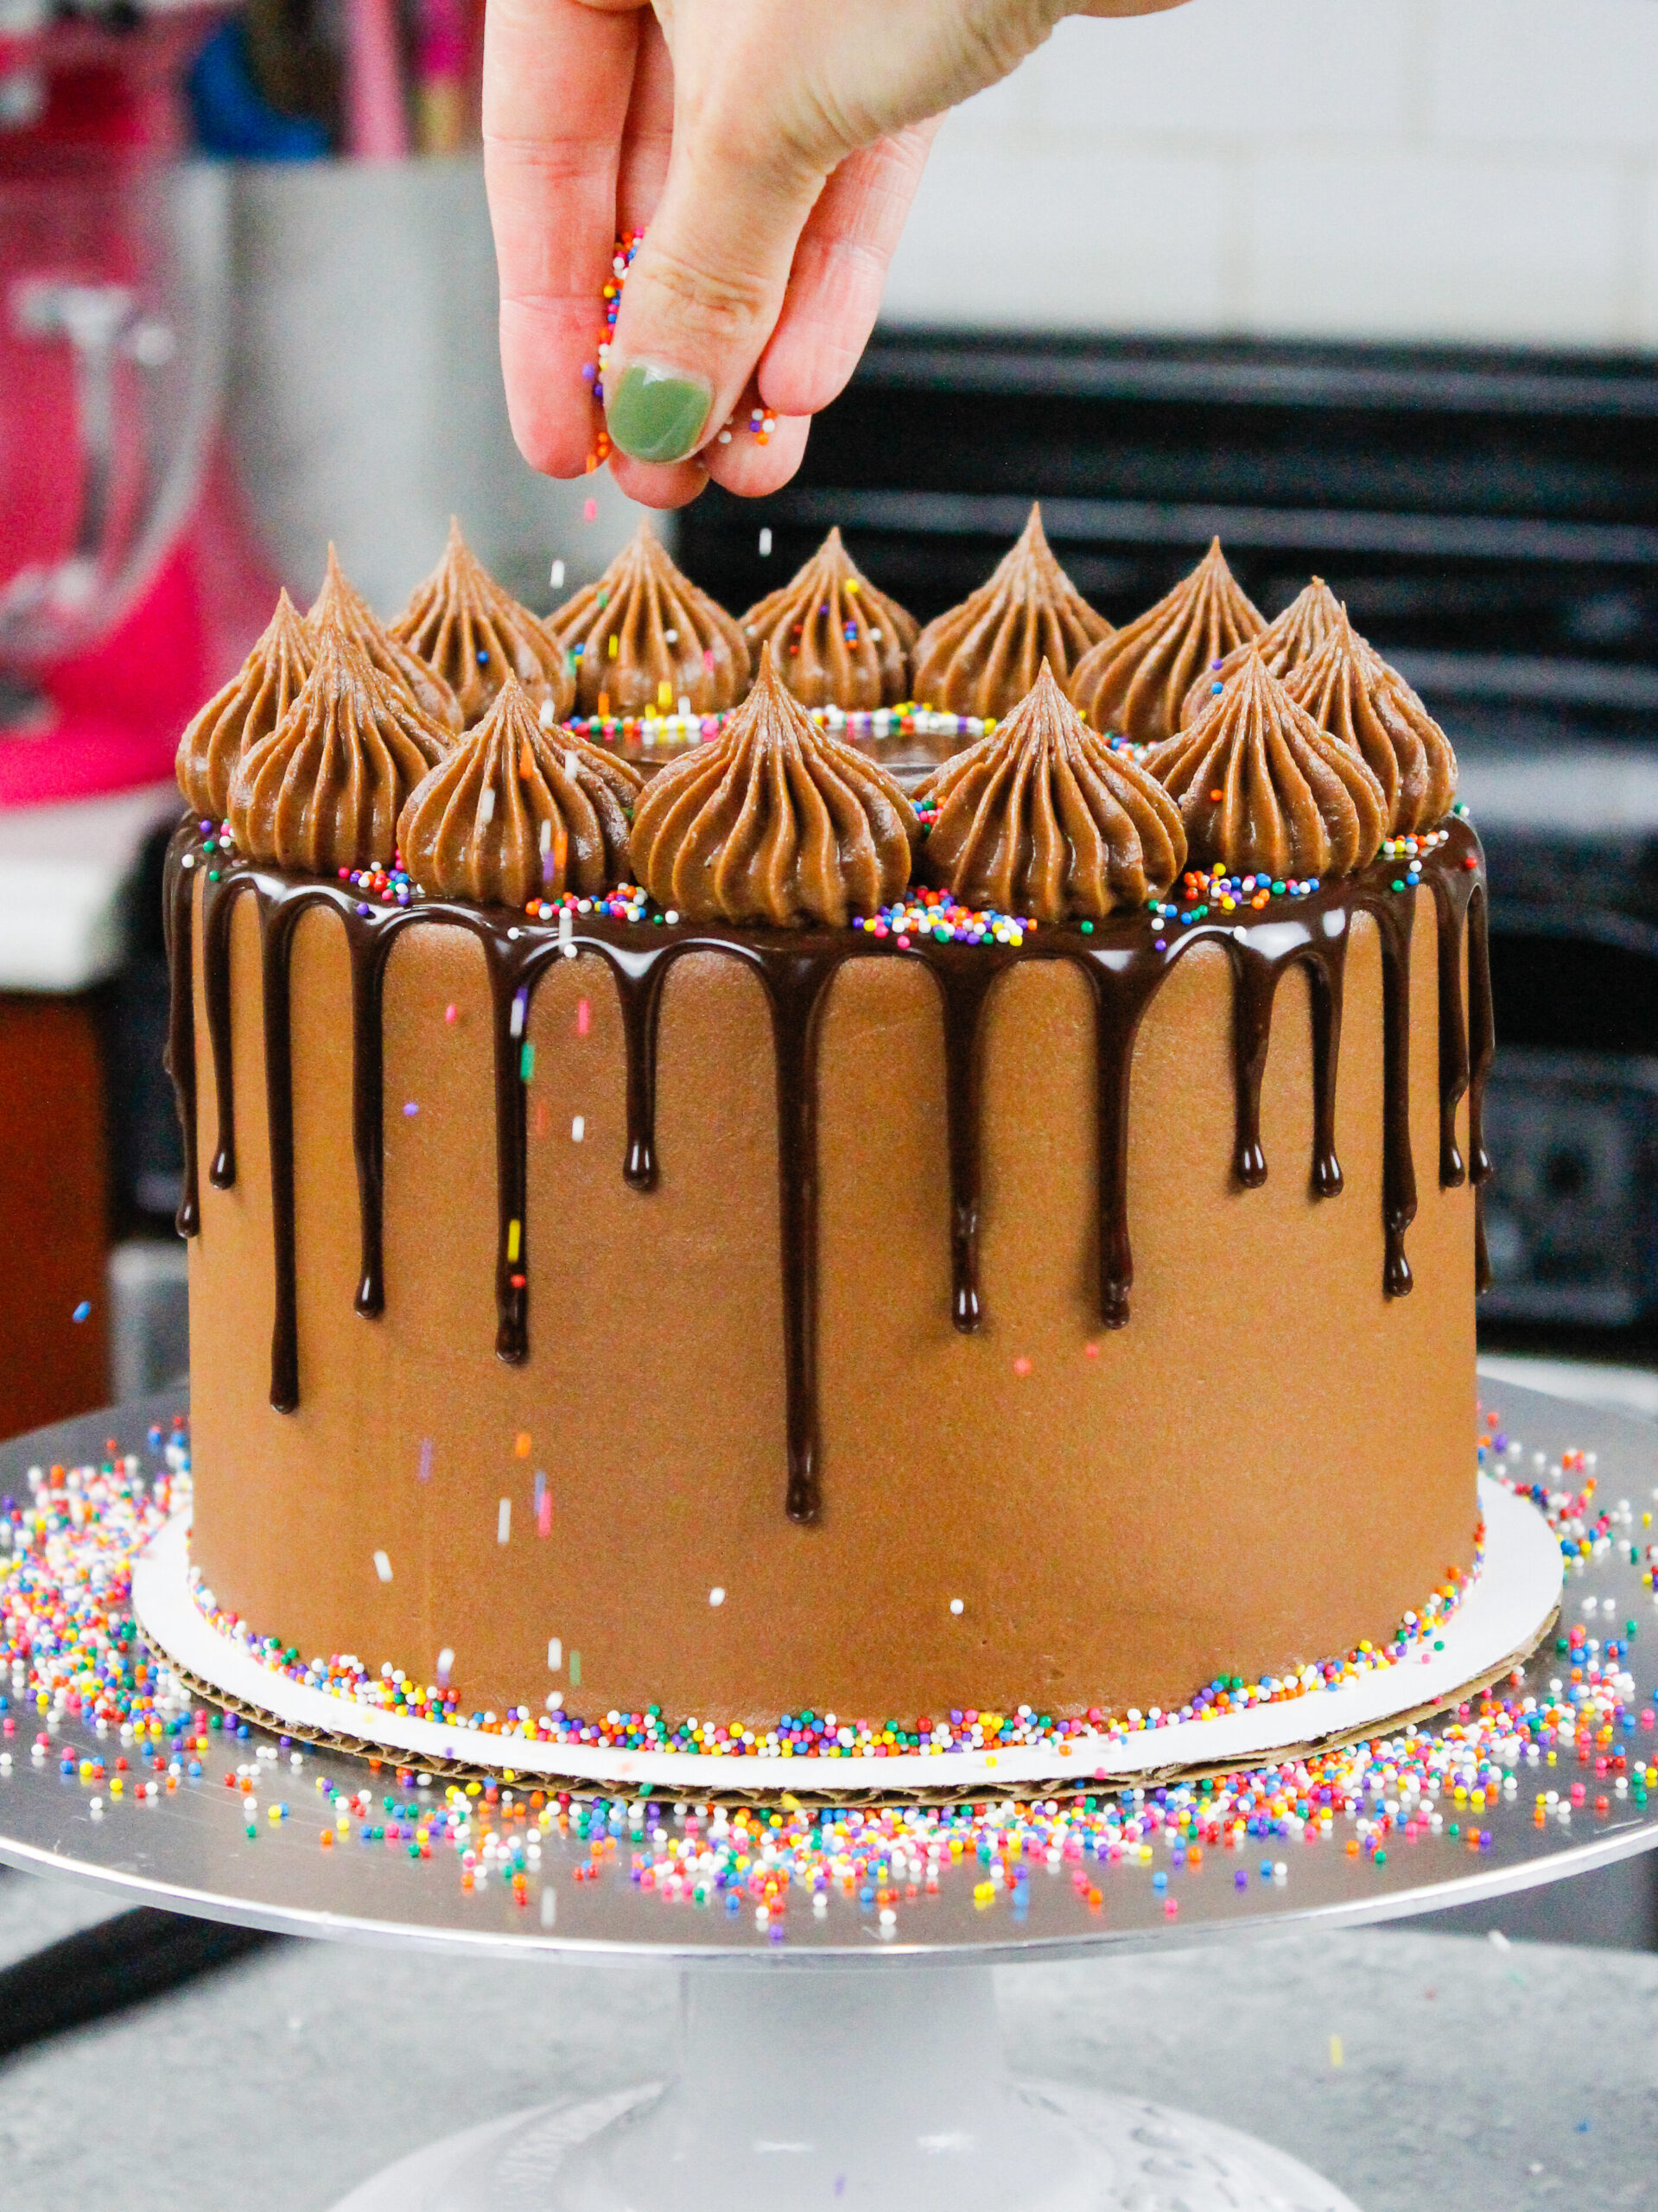 image of rainbow sprinkles being added to a chocolate drip cake